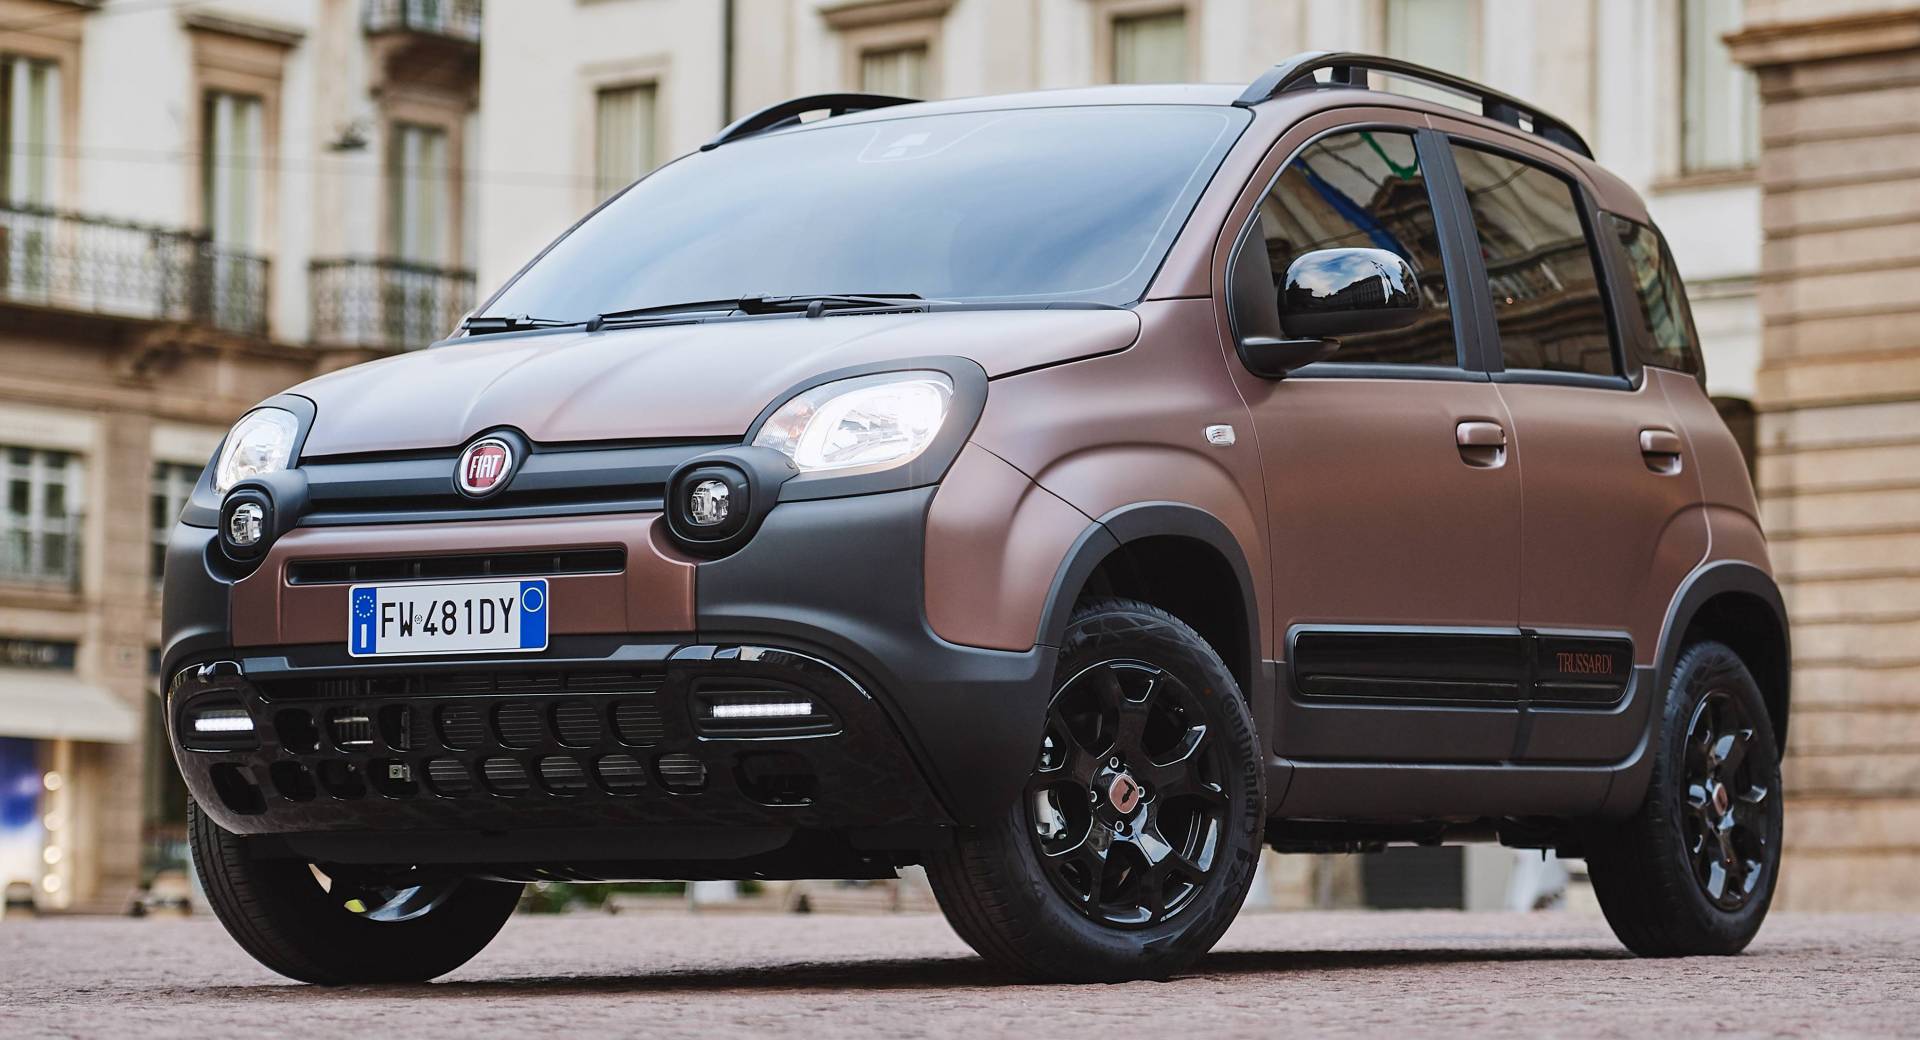 New Panda Trussardi Is The First Luxury Version Of Fiat's City Car